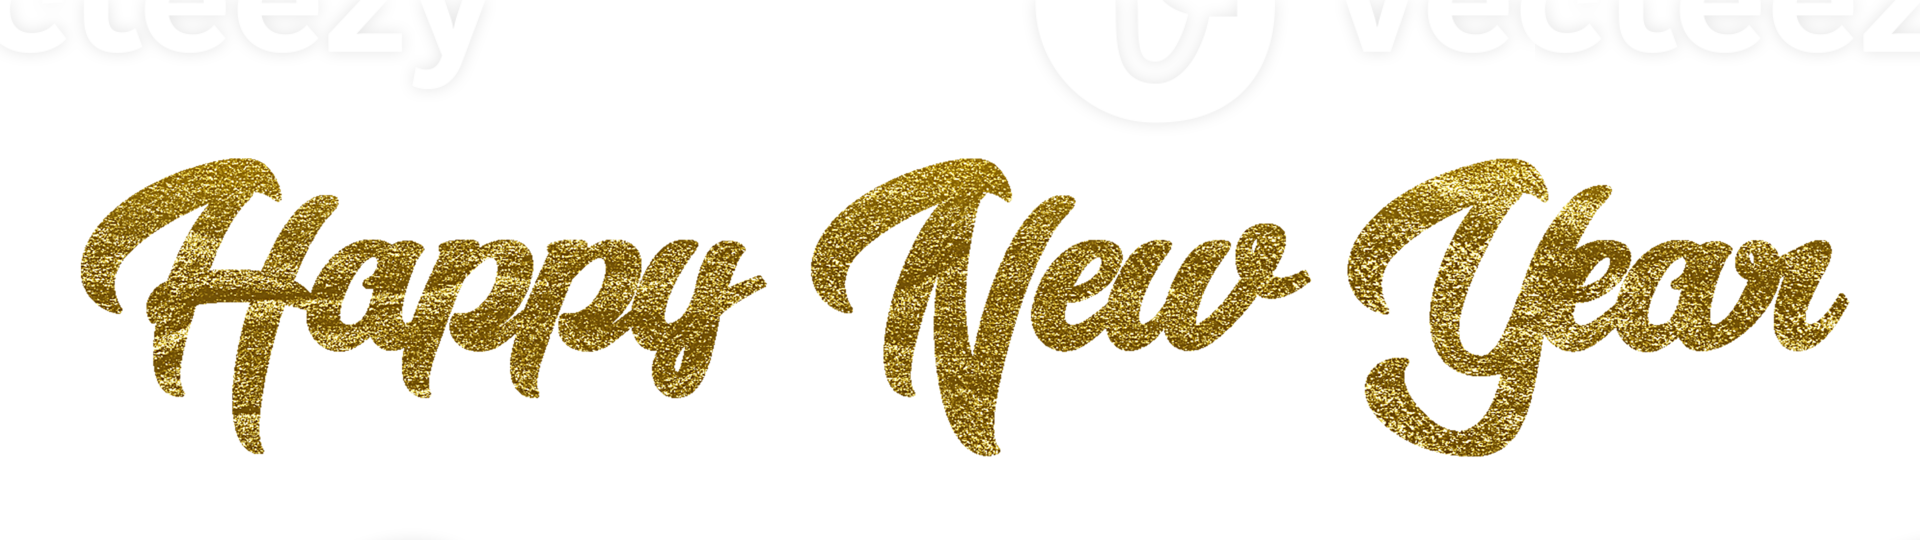 New Year PNG Image File